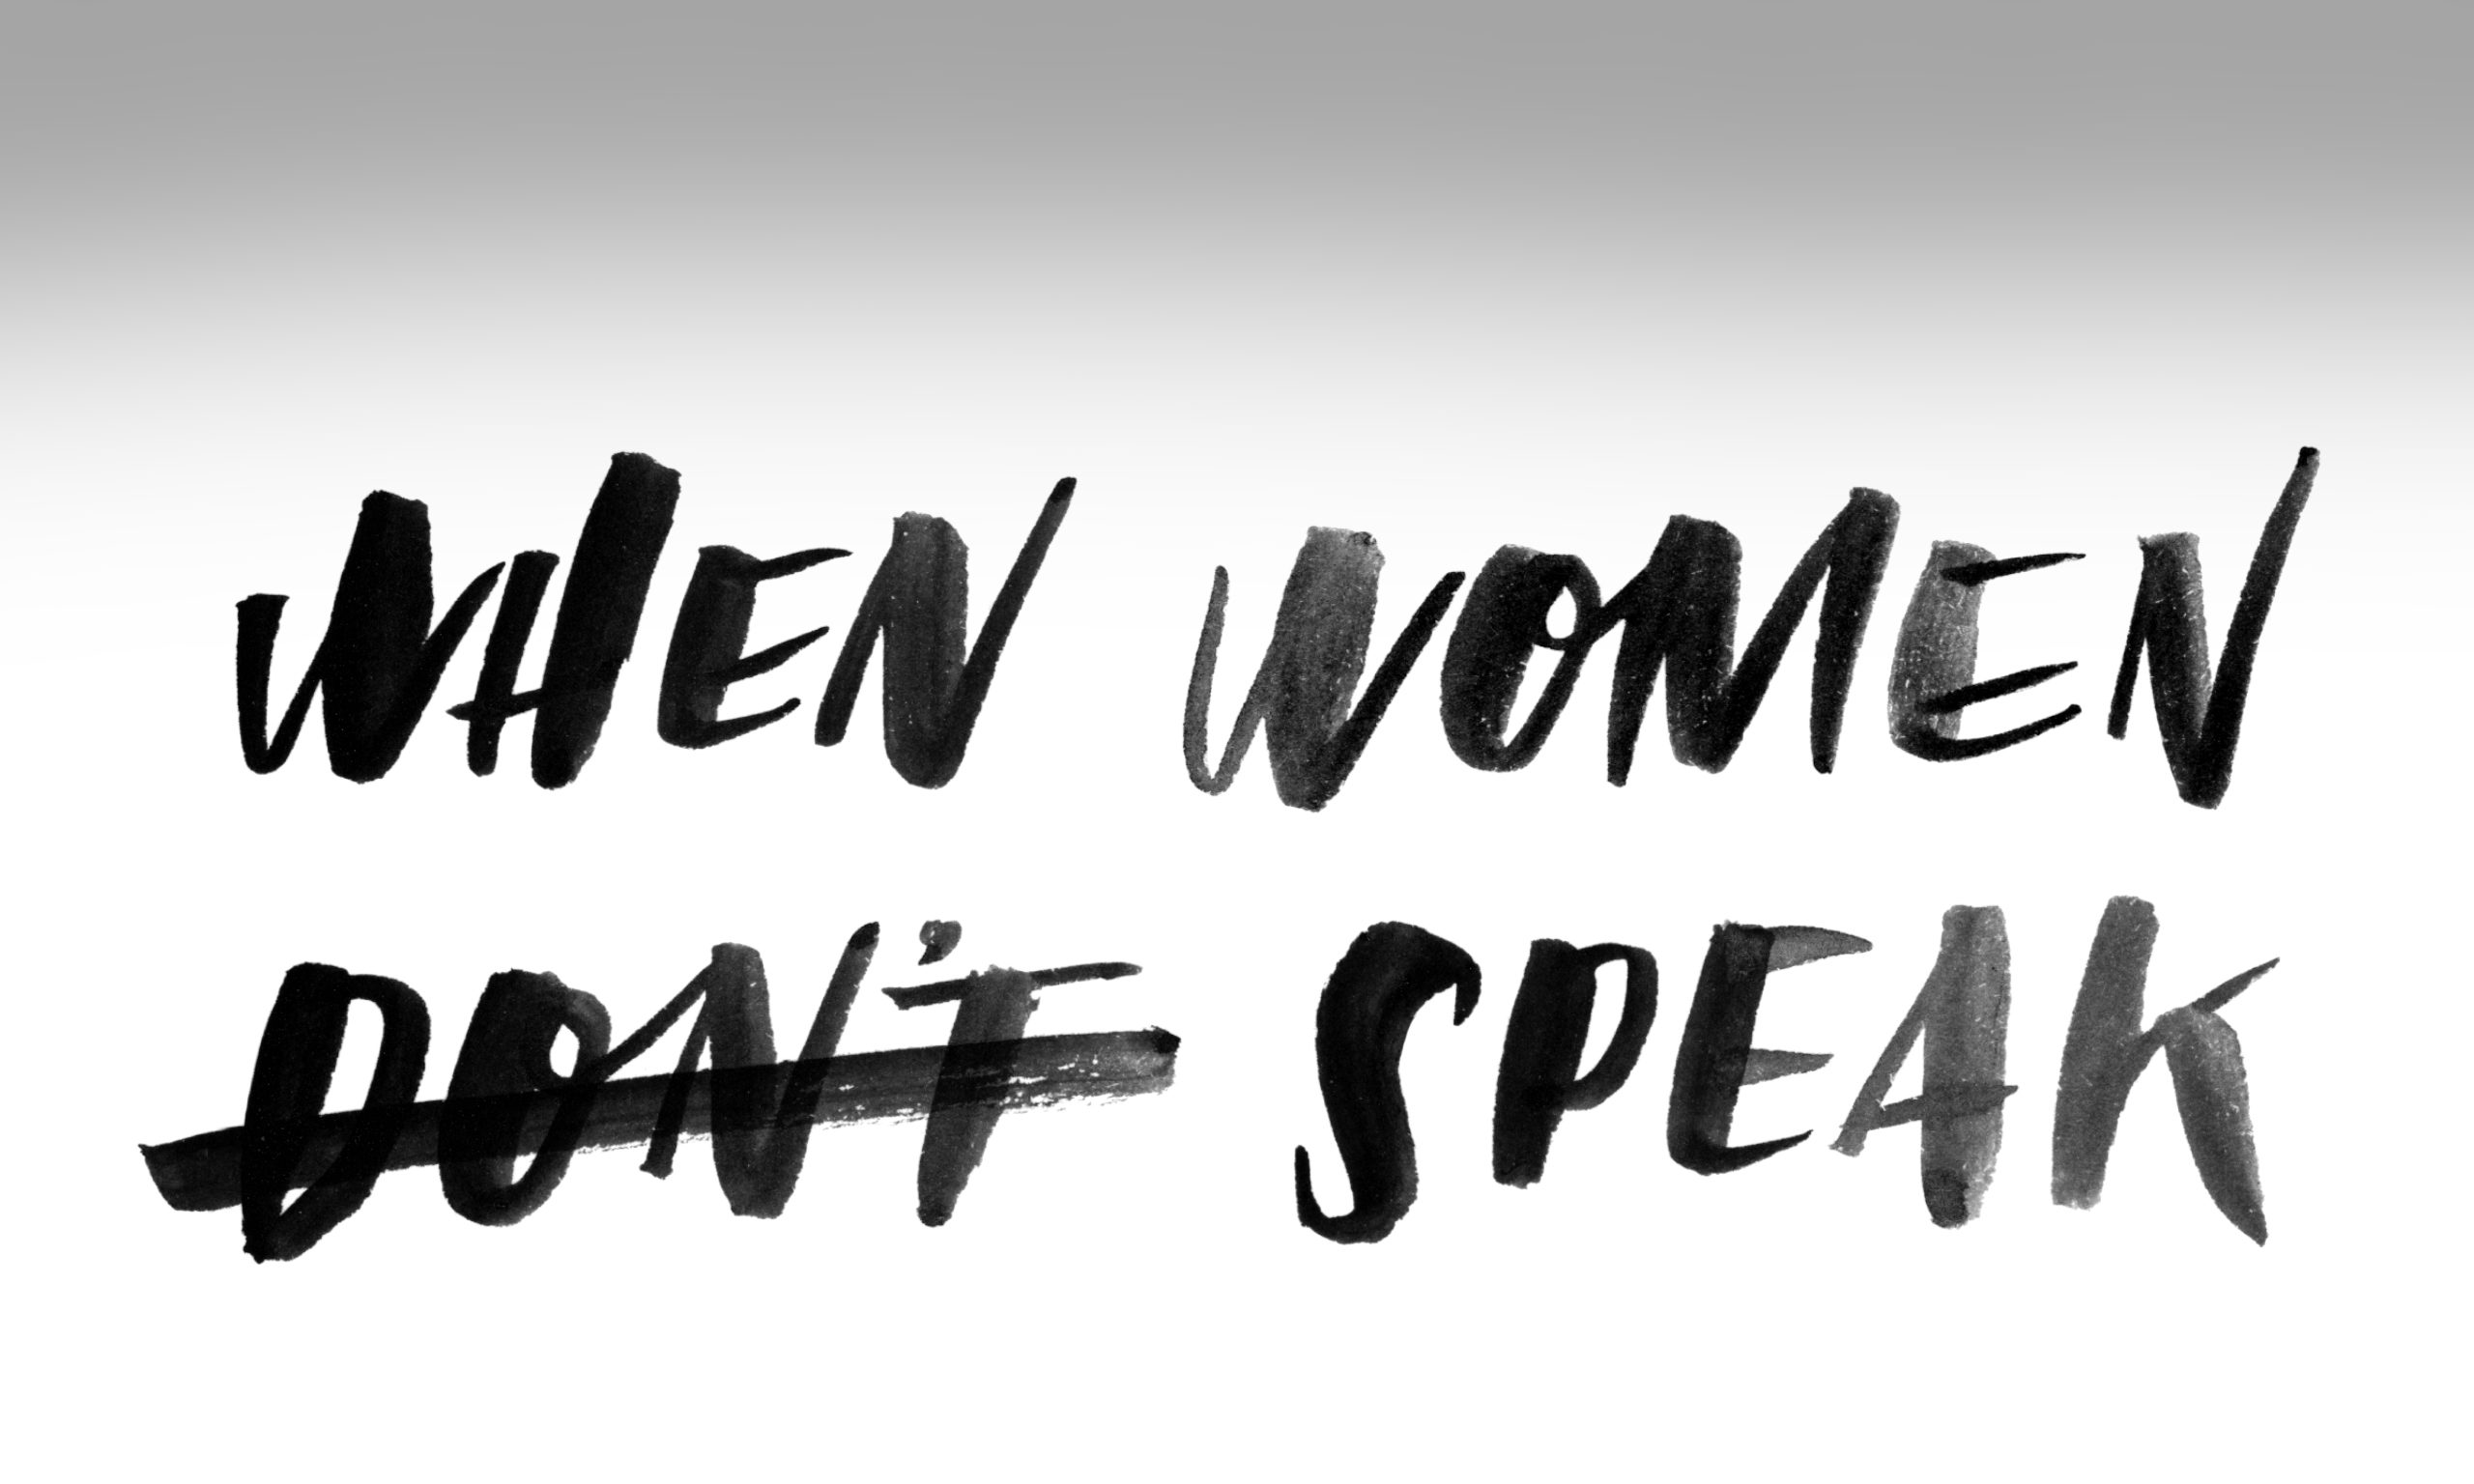 The title of the article, "When Women Don't Speak," in a hand-painted, hand-lettered font,."Don't" is struck out.